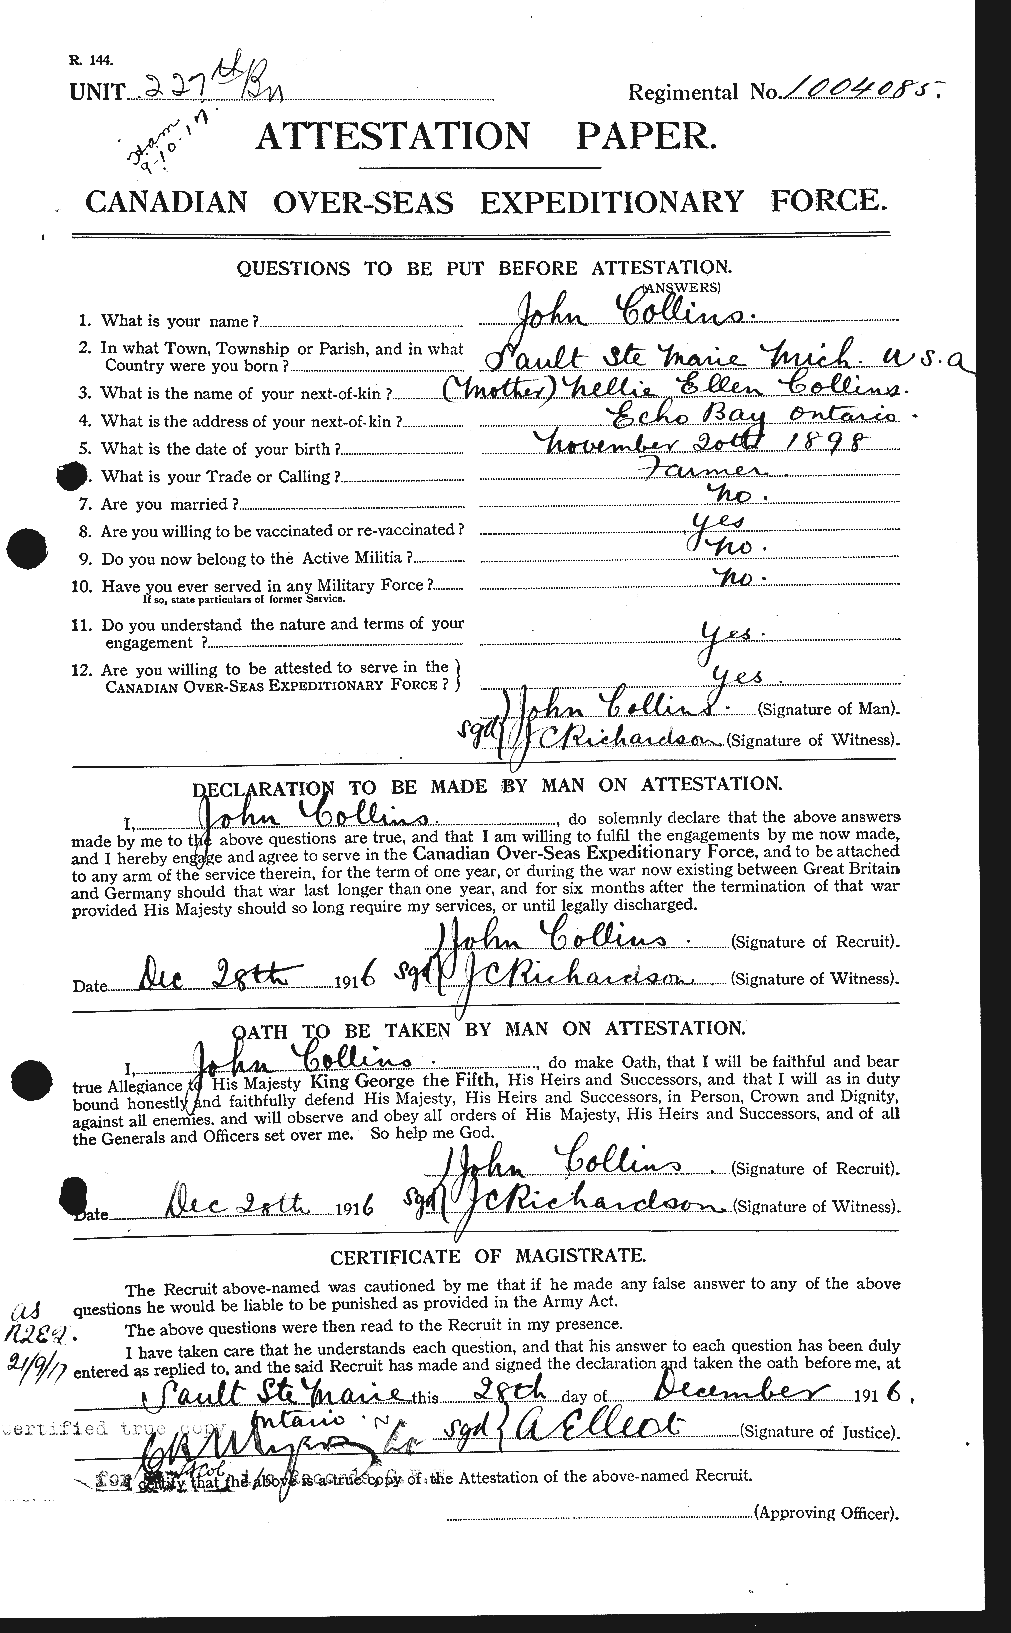 Personnel Records of the First World War - CEF 069795a